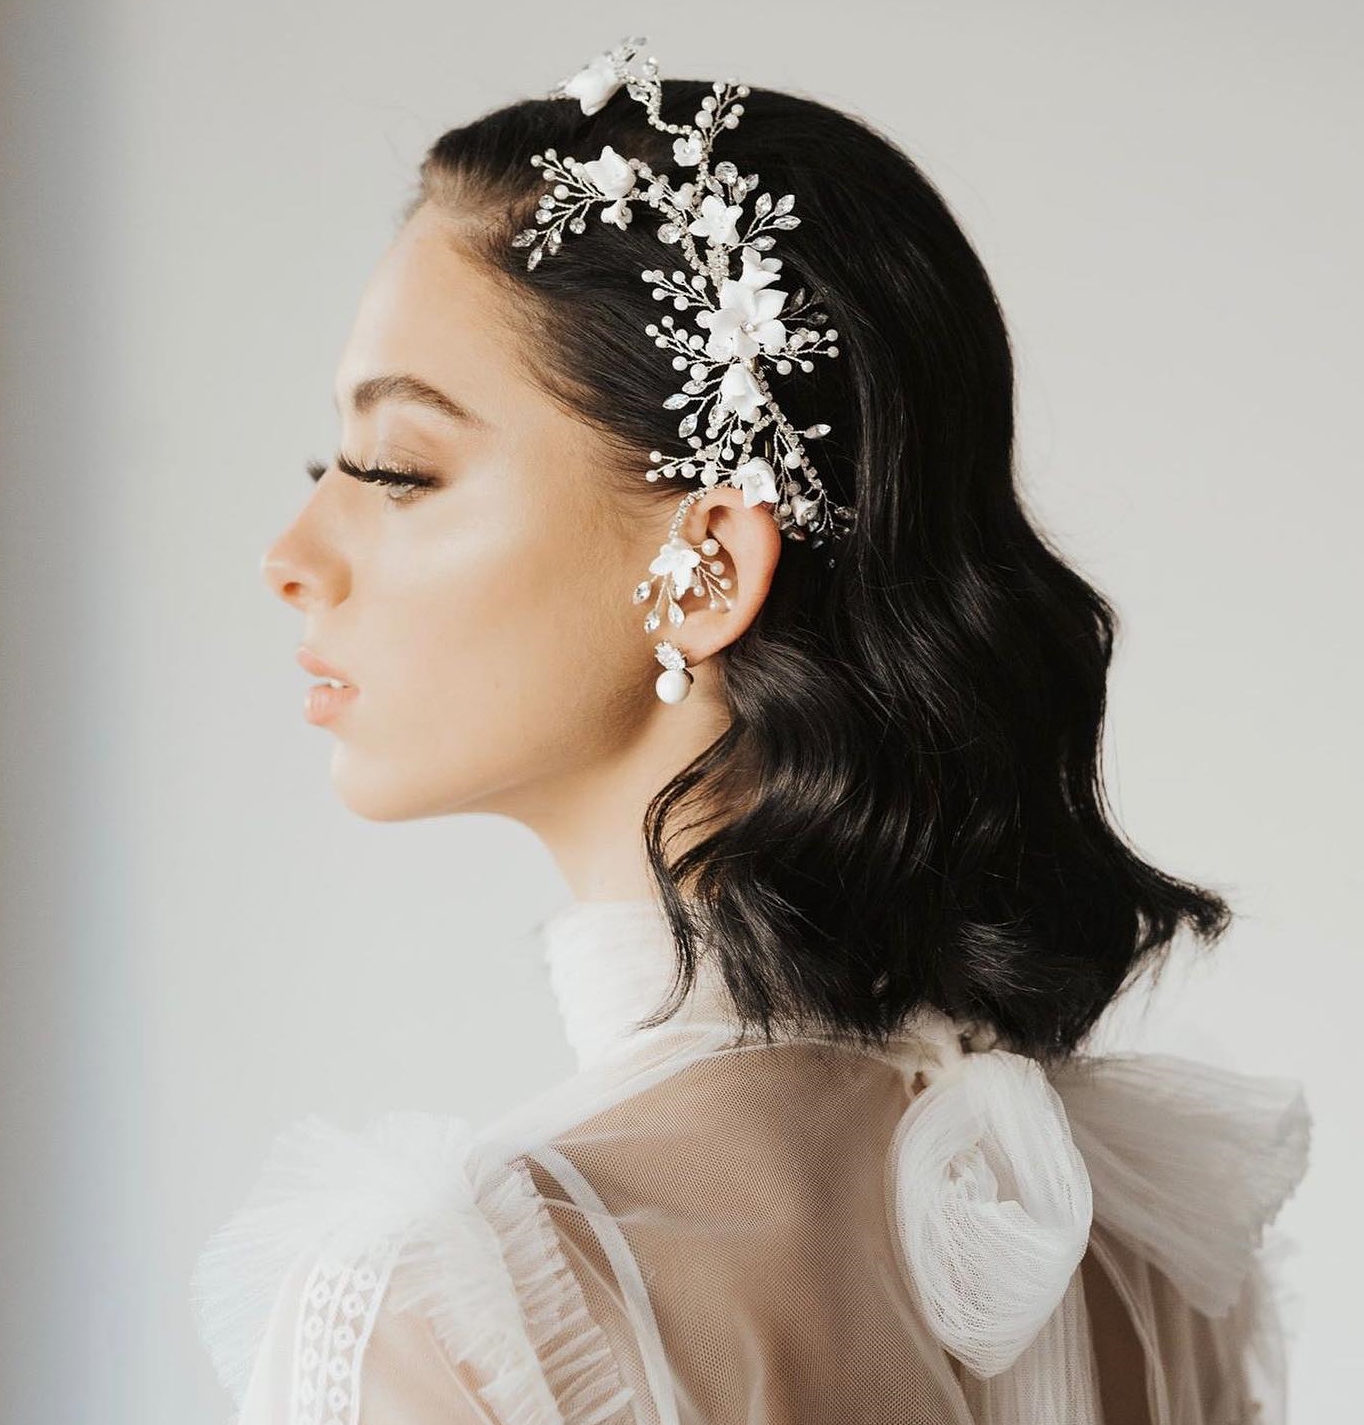 50 Romantic Wedding Hairstyles to Bring the Bride's Image to Perfection -  Hairstylery